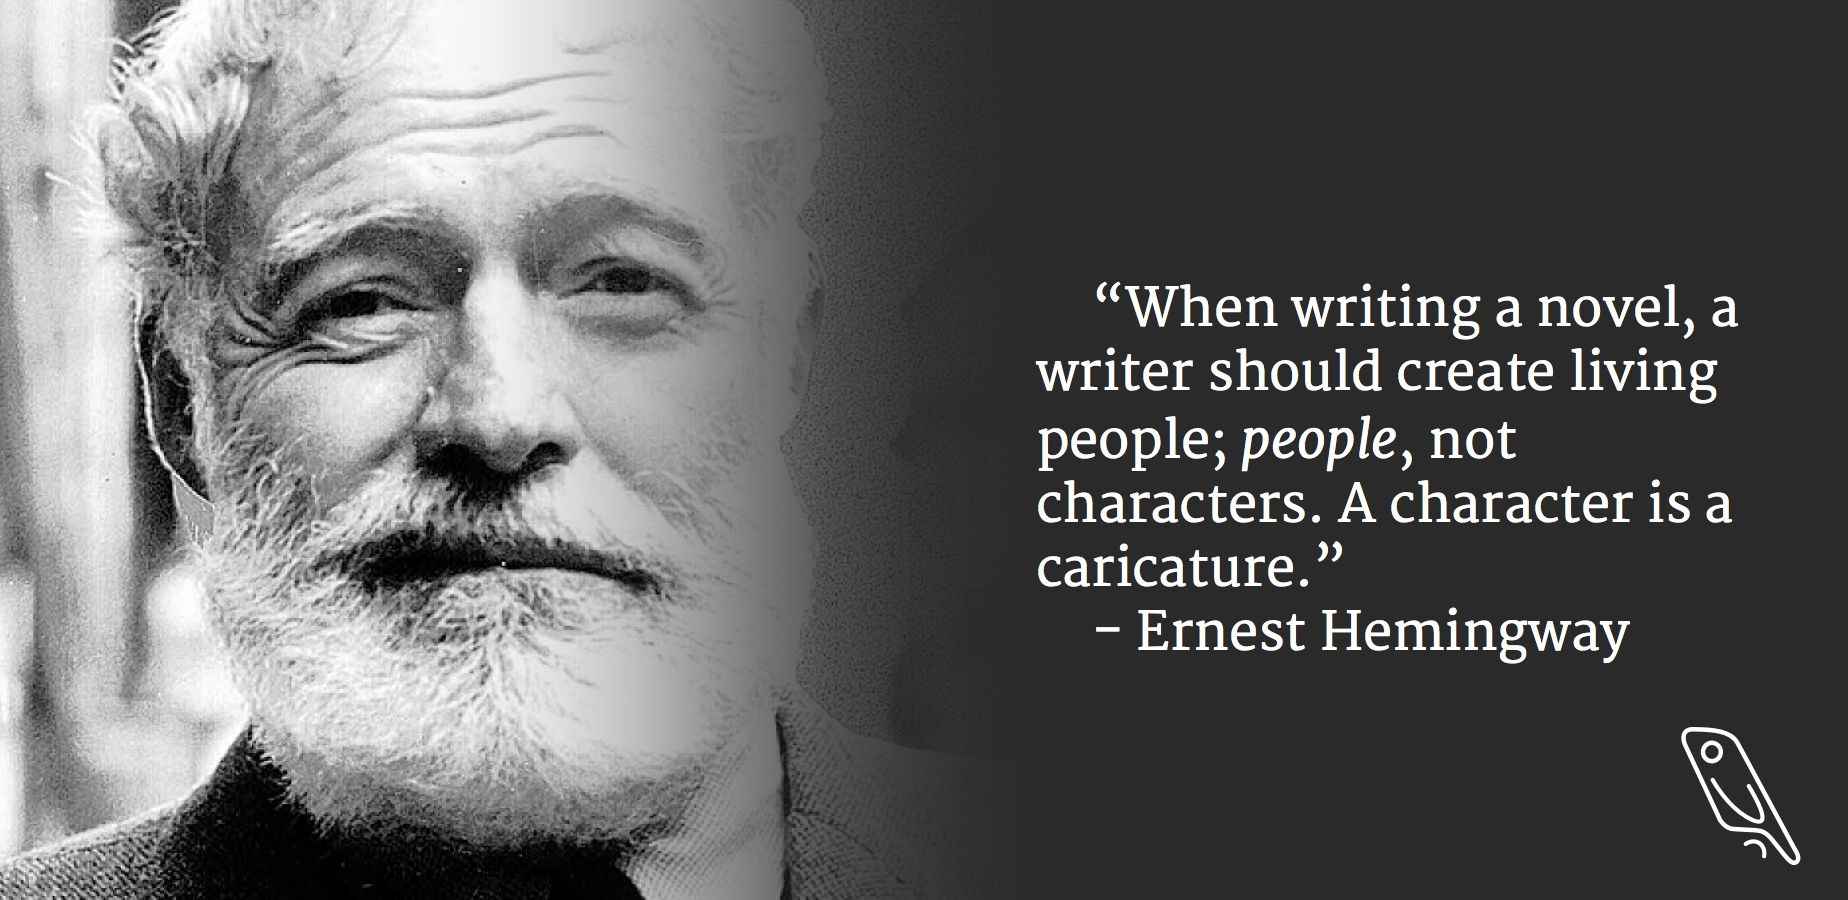 famous quotes for essays